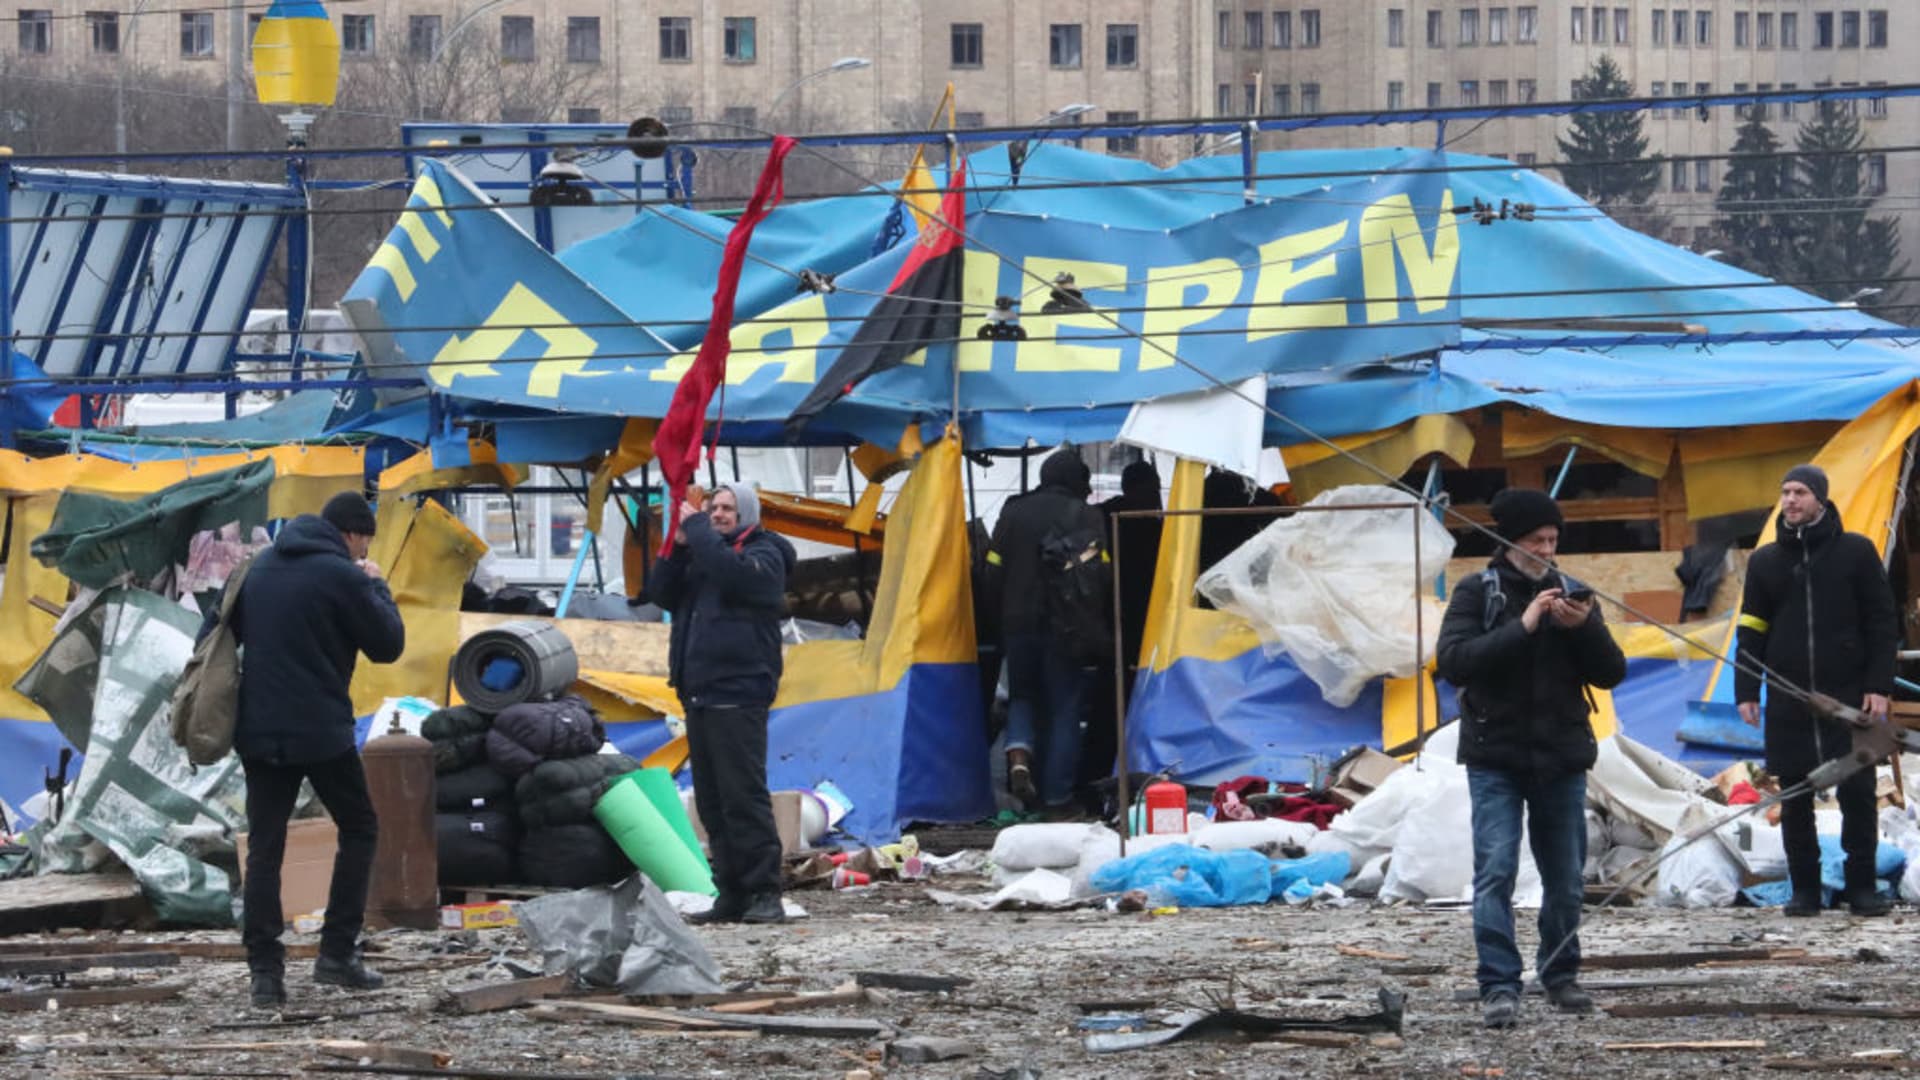 People stay by the All for Victory Tent of volunteers after a missile launched by Russian invaders hit outside the Kharkiv Regional State Administration building in SvobodySquare at approximately 8 am local time on Tuesday, March 1, Kharkiv, northeastern Ukraine.